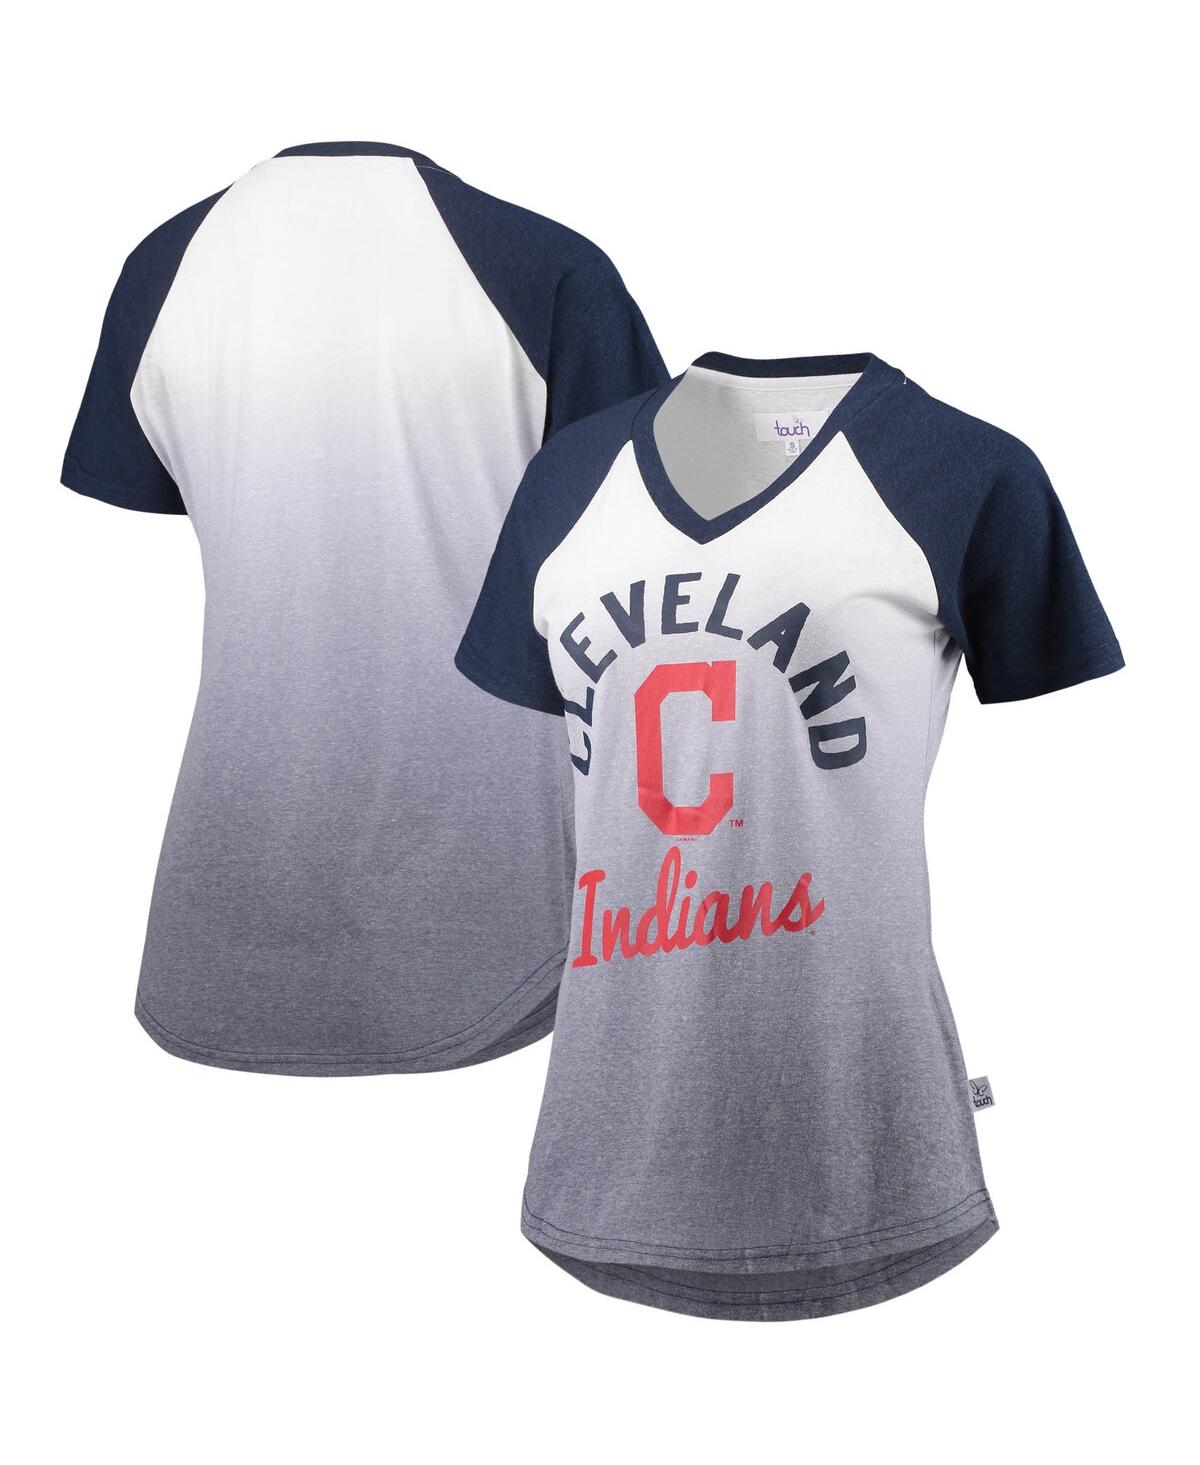 Women's Navy and White Cleveland Indians Shortstop Ombre Raglan V-Neck T-shirt - Navy, White